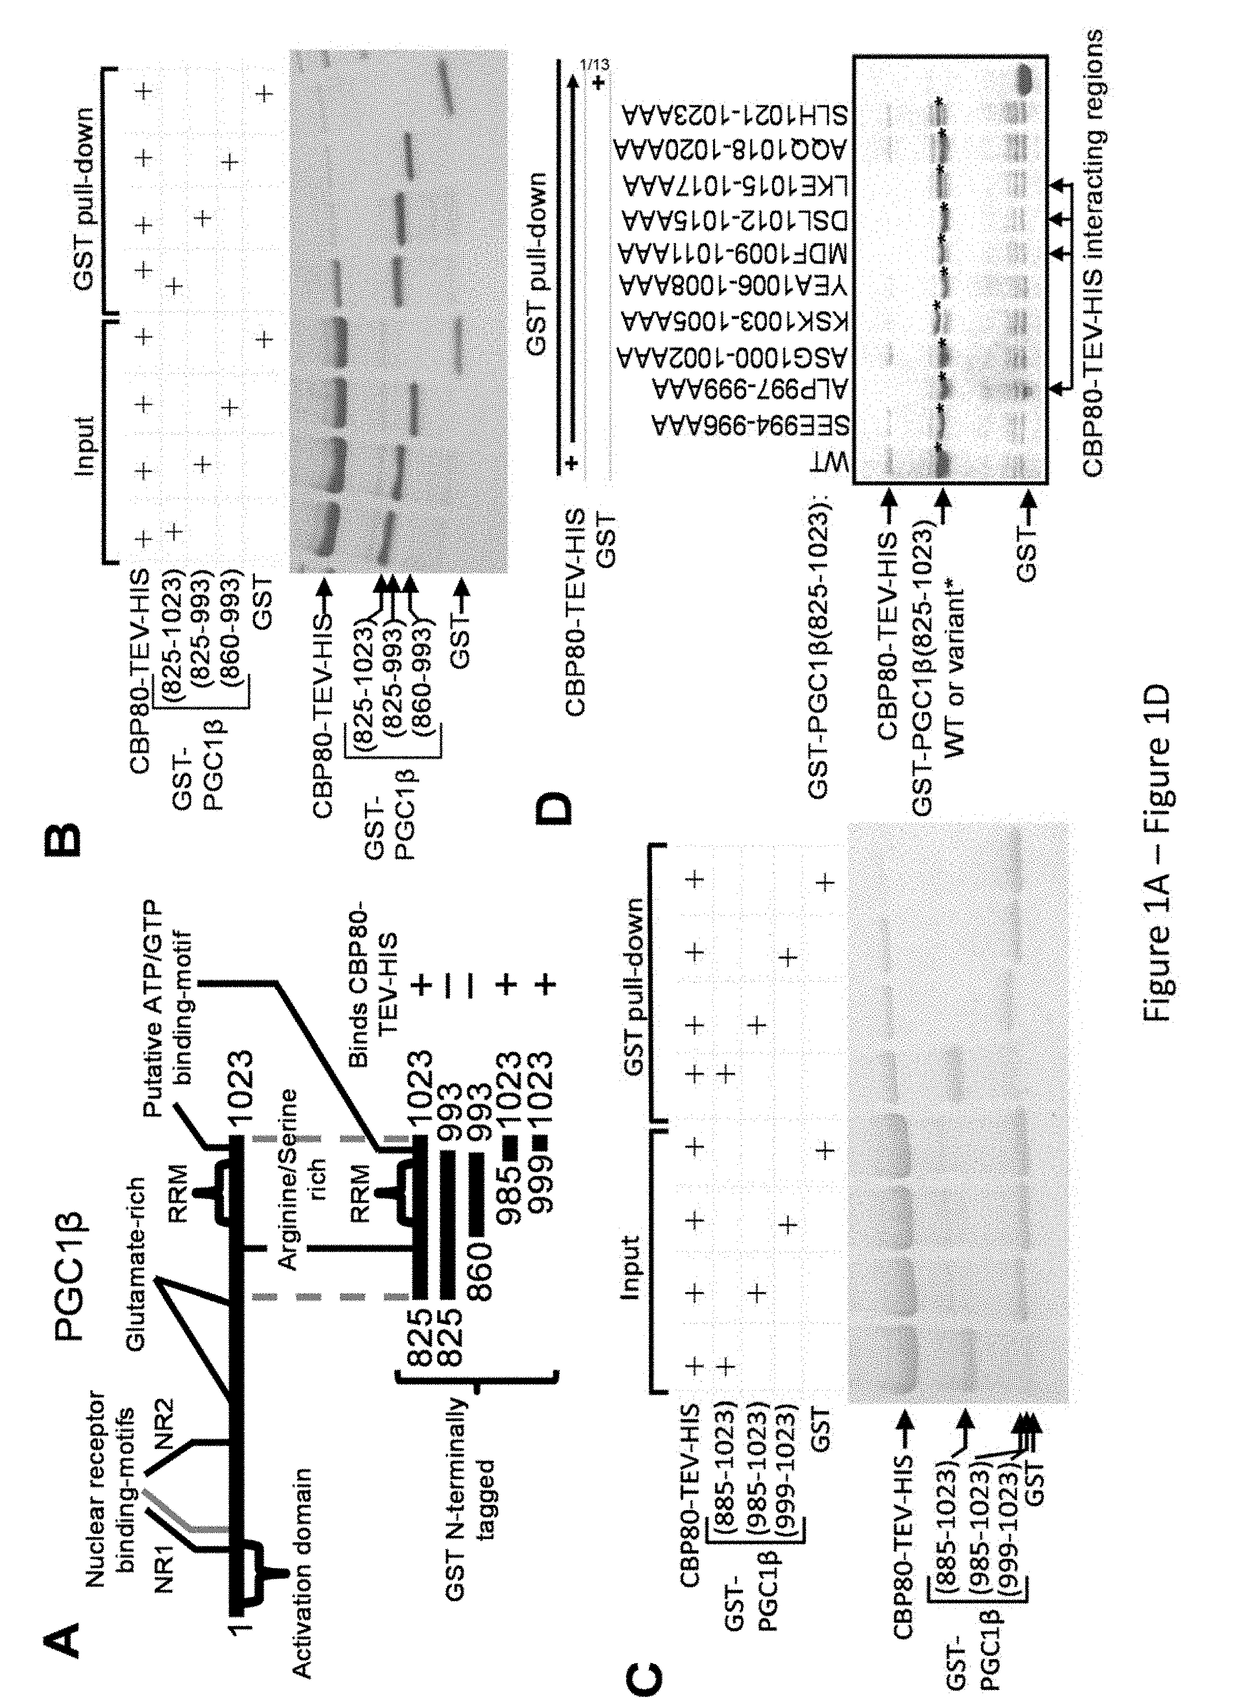 Compositions and Methods for Inhibiting CBP80 Binding to PGC1 Family of Co-Activators